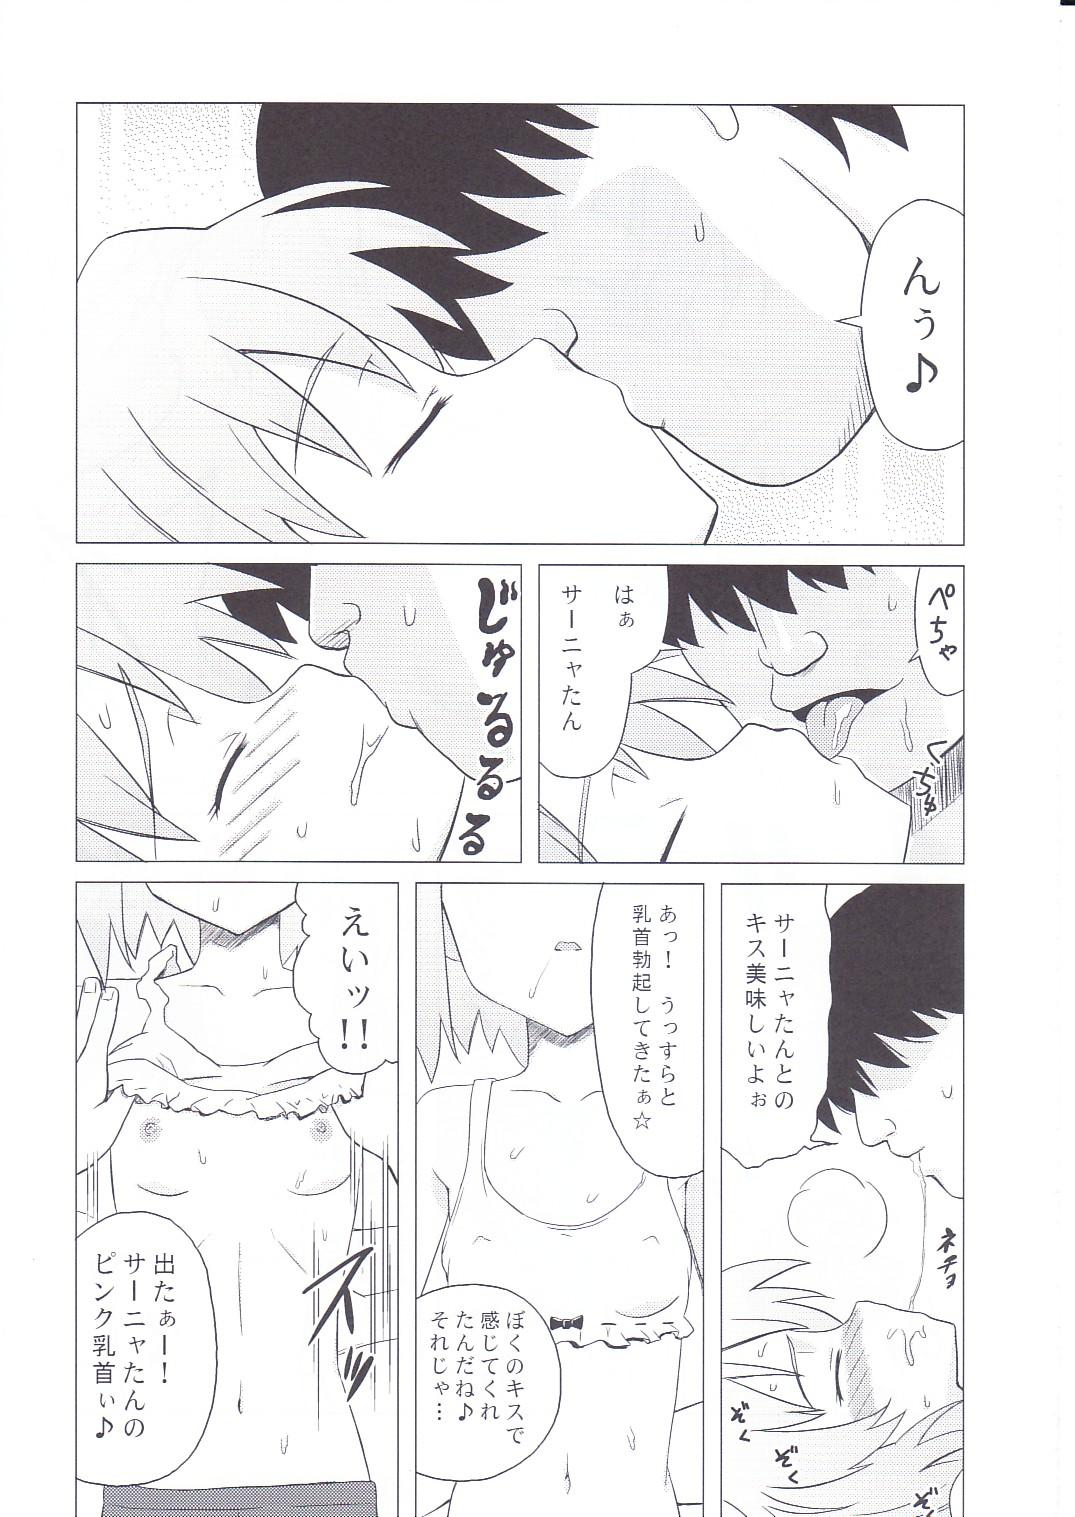 Dildo Sleeping witches - Strike witches Girlsfucking - Page 6